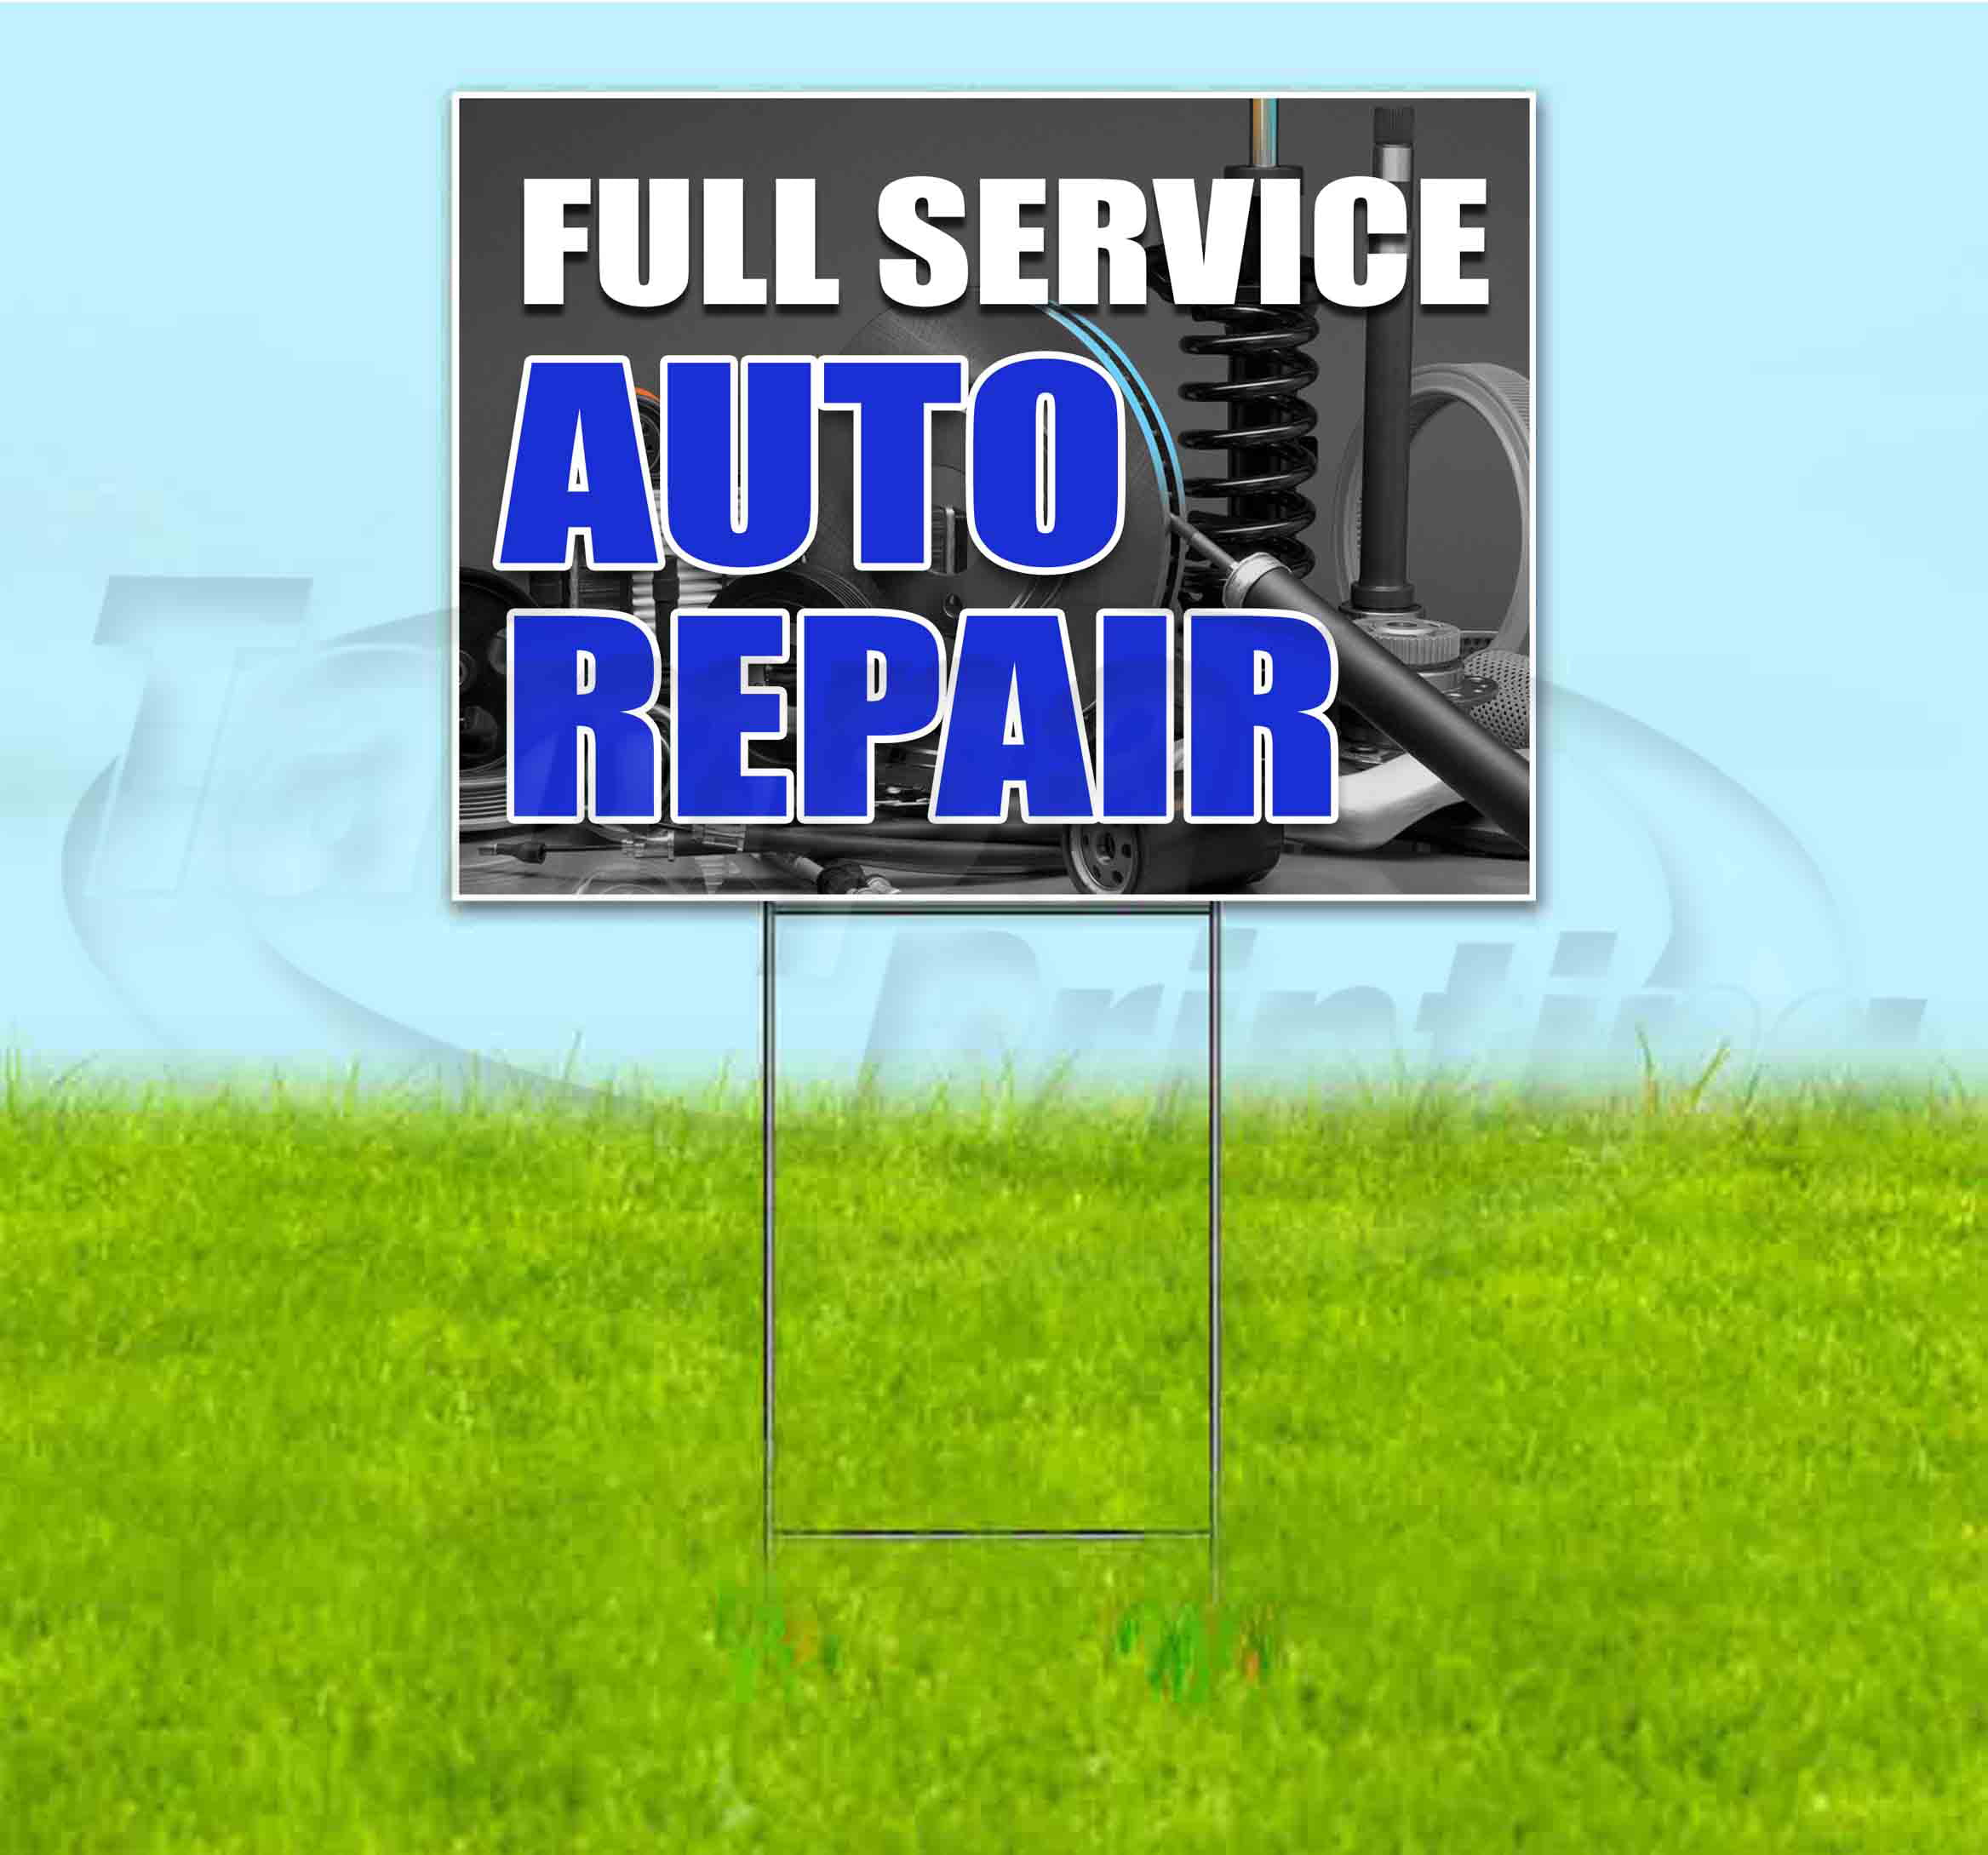 18"x24" OIL CHANGE Outdoor Yard Sign & Stake Sidewalk Lawn Auto Repairs Service 